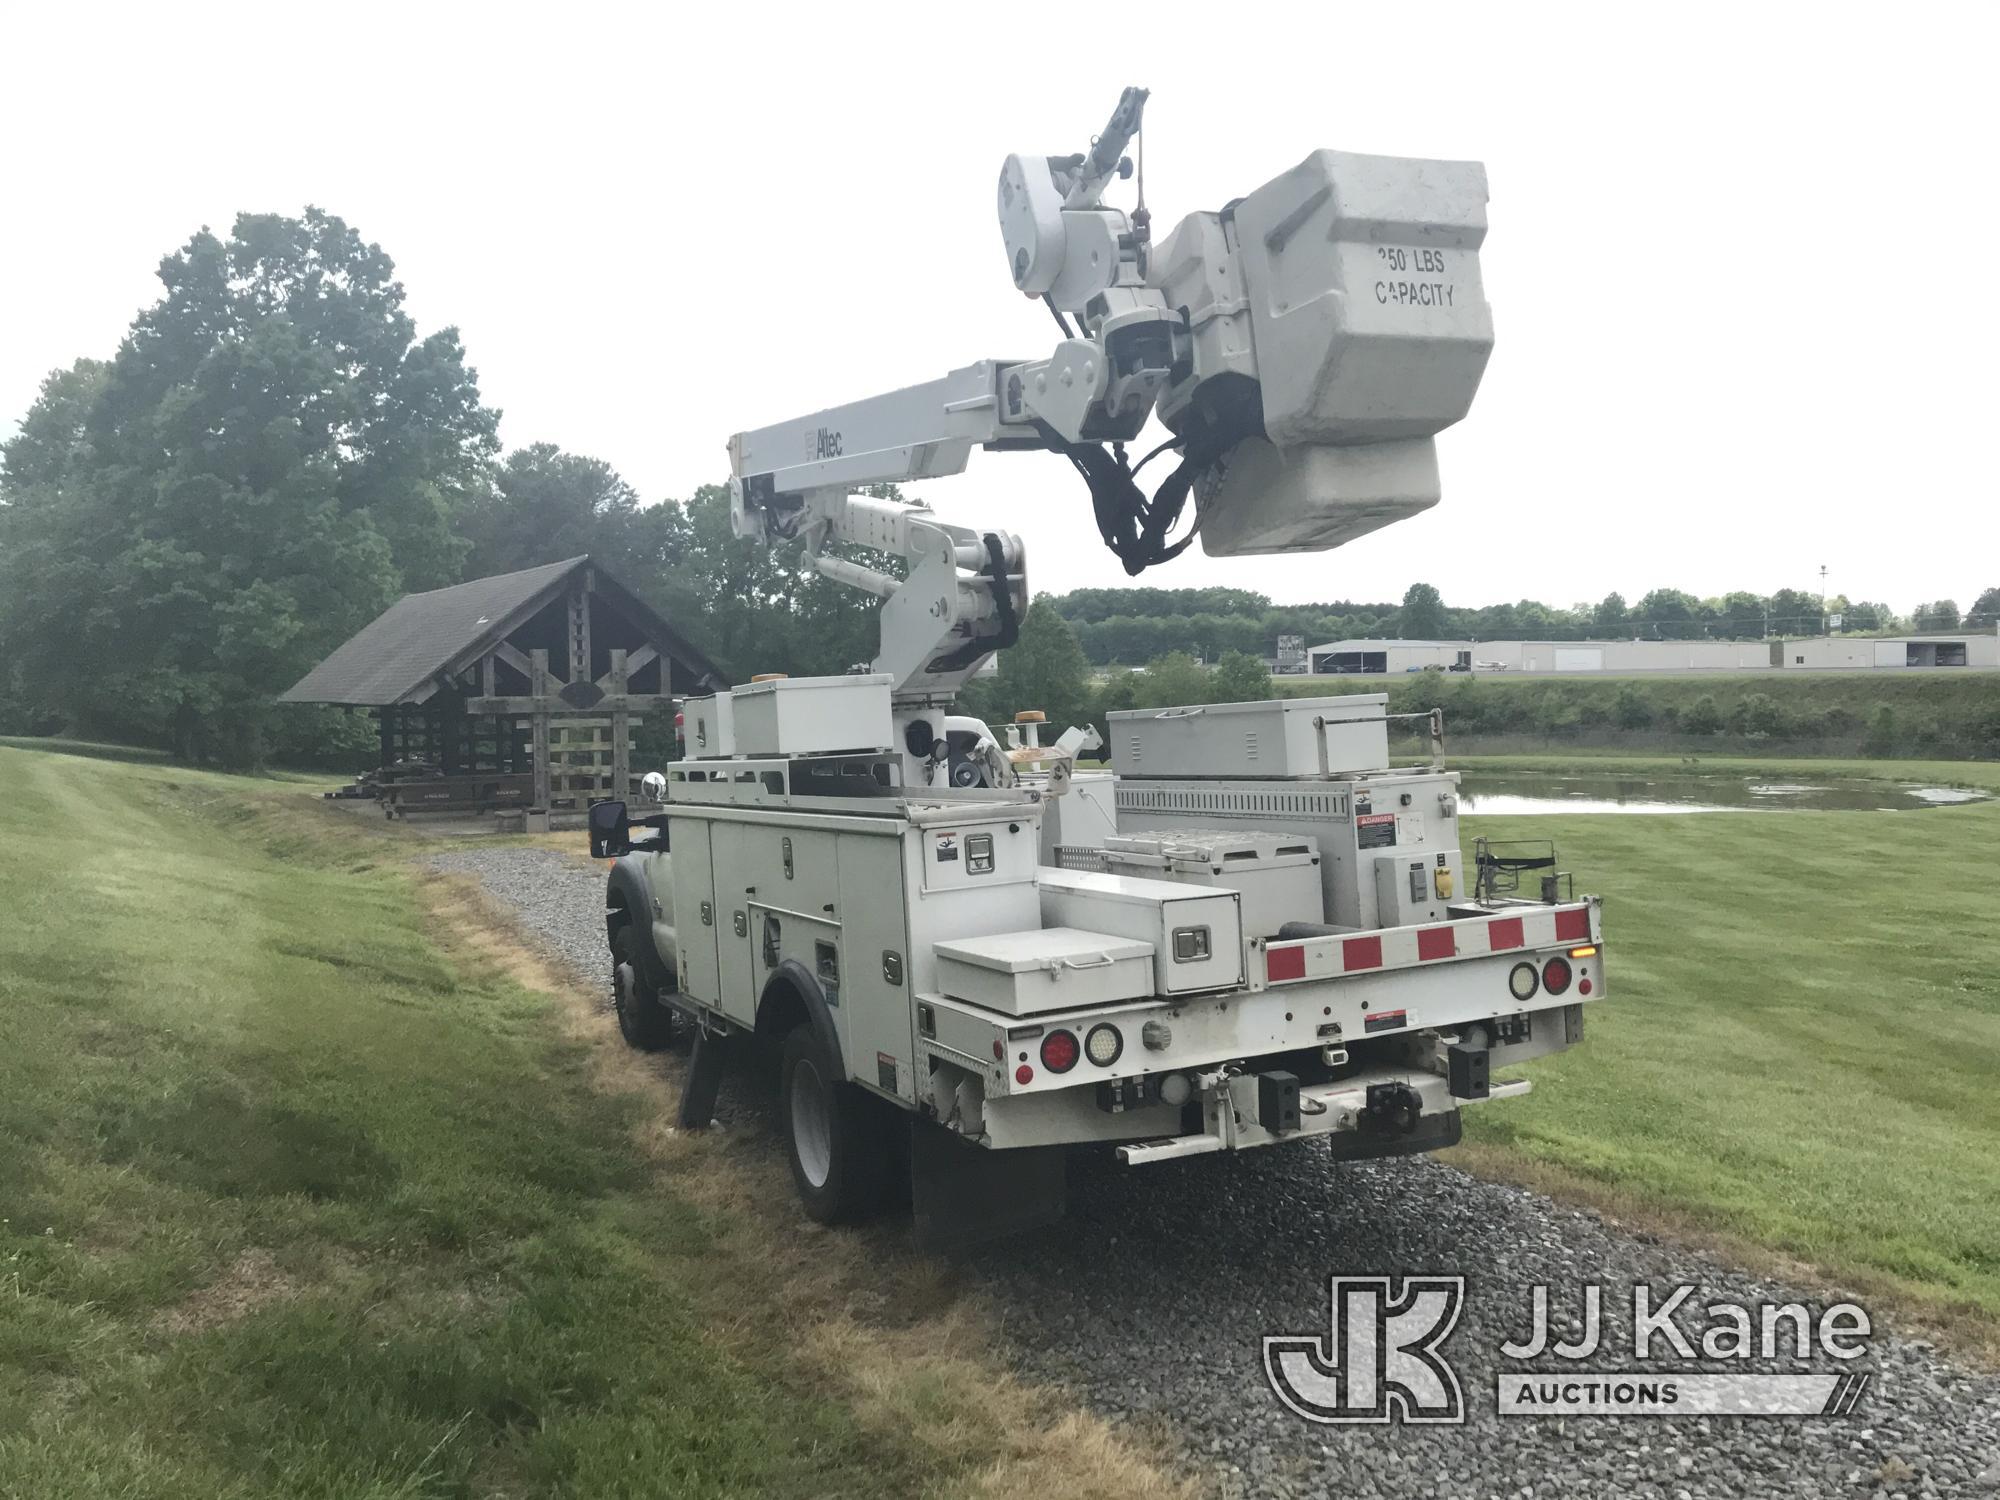 (Mount Airy, NC) Altec AT40-MH, Articulating & Telescopic Material Handling Bucket Truck mounted beh